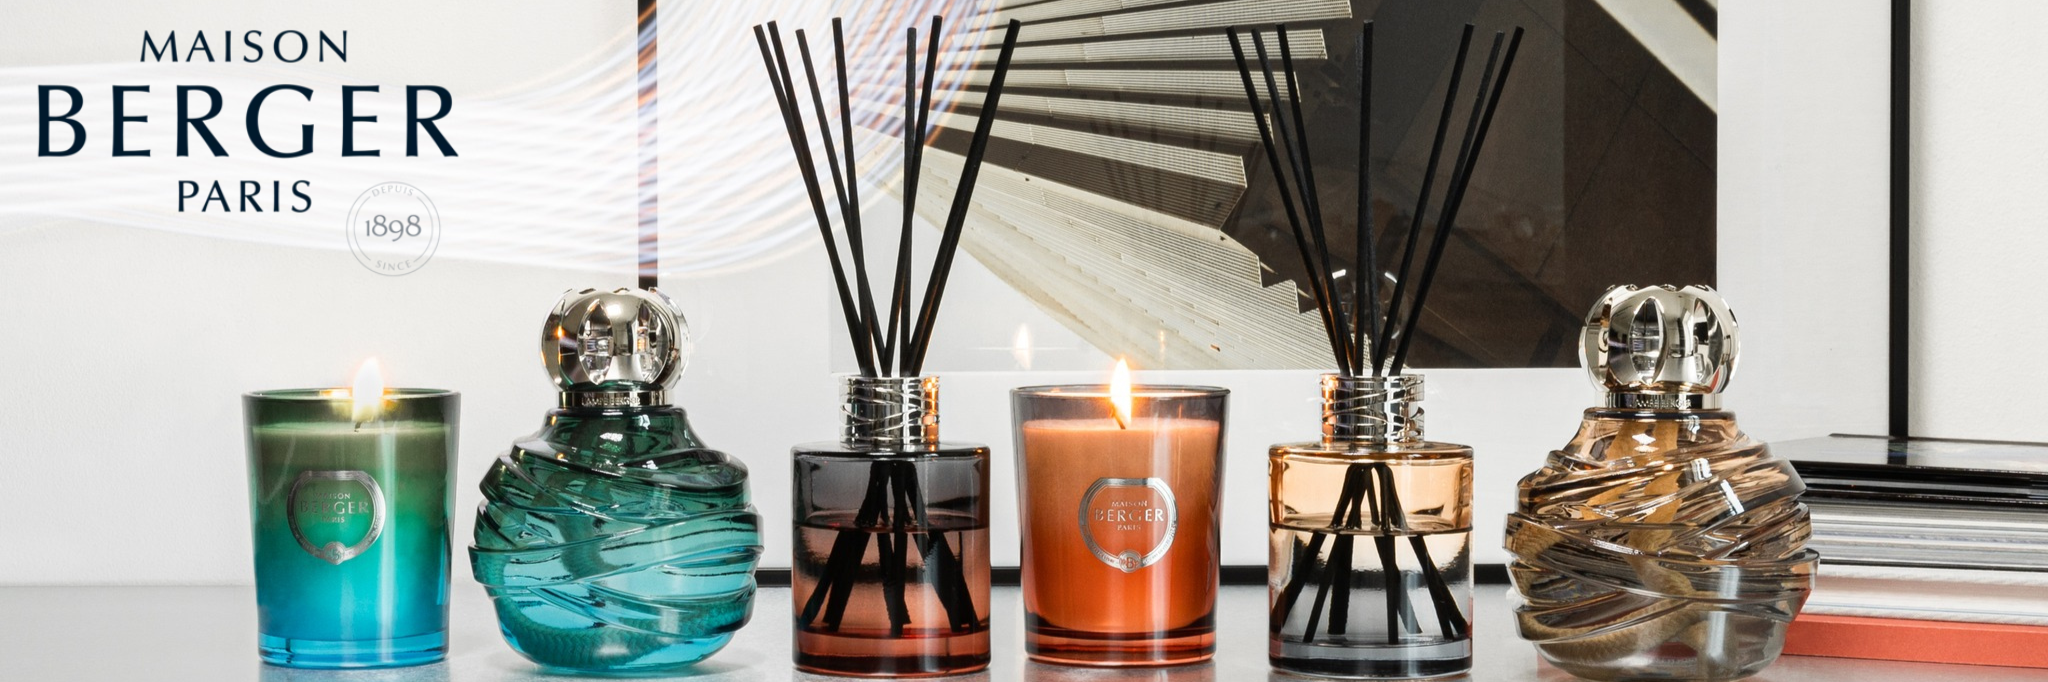 A line up of Maison Berger products. Candles, diffusers, and lamps